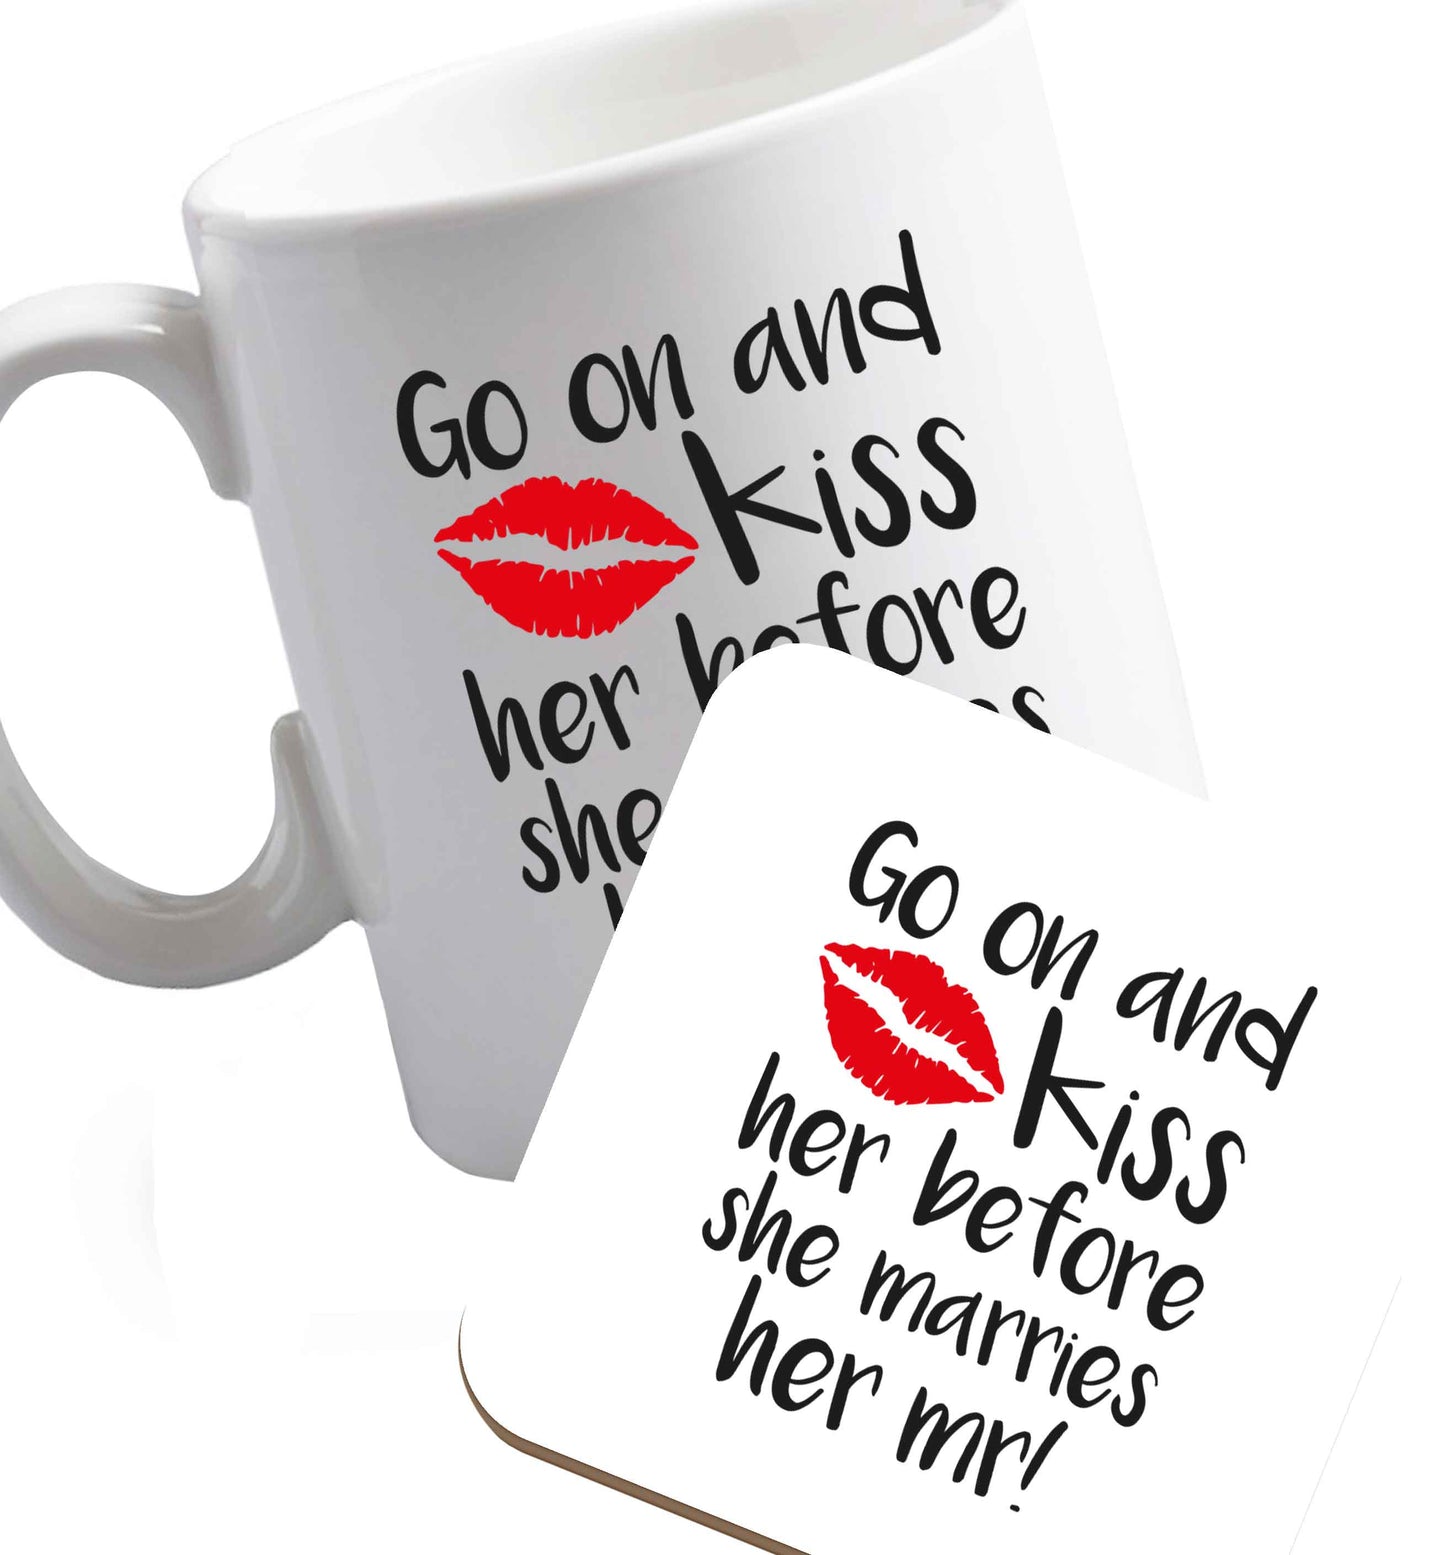 10 oz Kiss her before she marries her mr!   ceramic mug and coaster set right handed